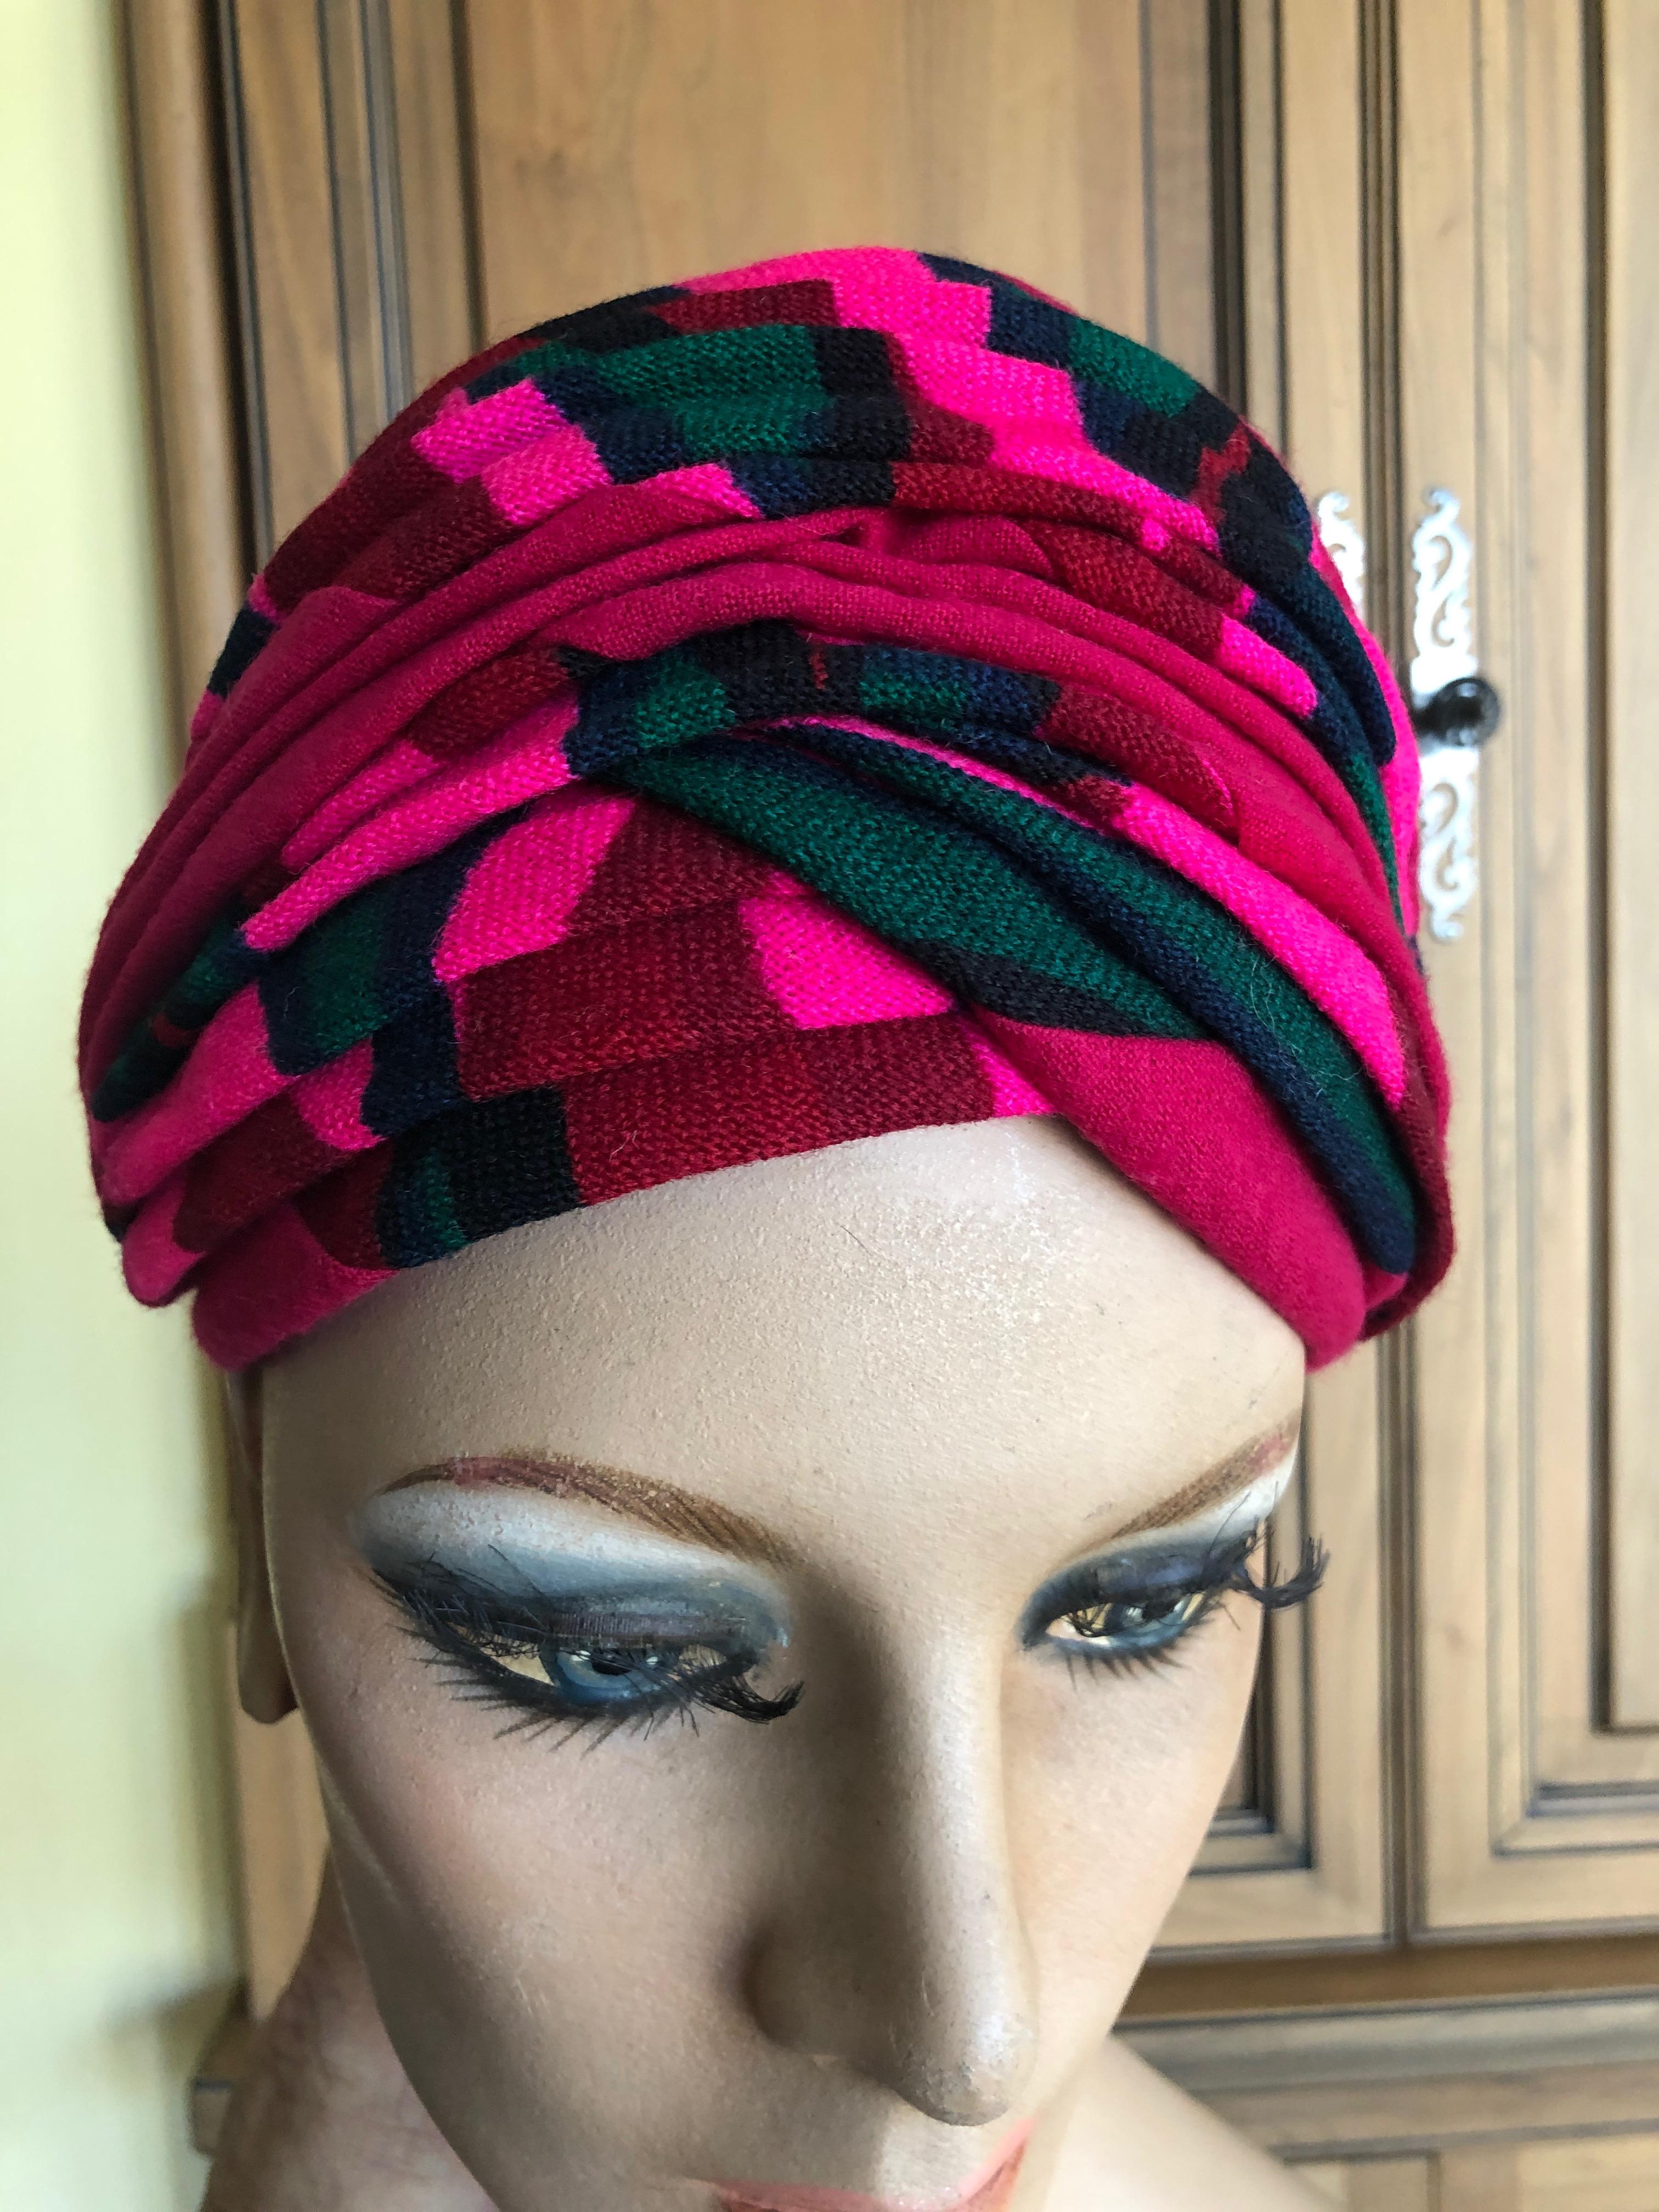 Christian Dior Chapeaux Colorful 60's Turban   In Excellent Condition For Sale In Cloverdale, CA